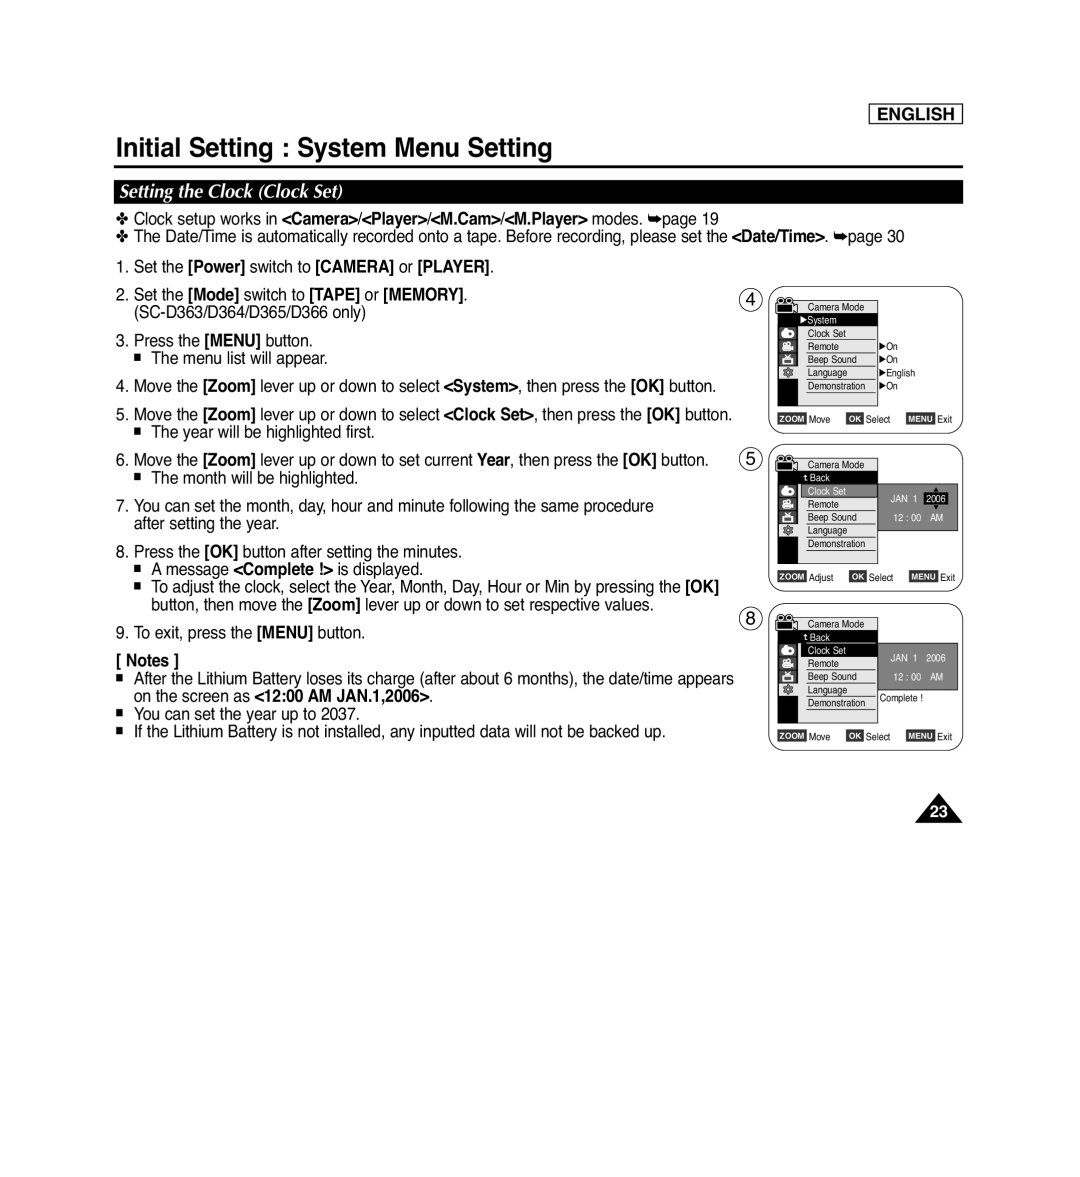 Samsung SC-D362 Initial Setting System Menu Setting, Setting the Clock Clock Set, Set the Power switch to CAMERA or PLAYER 